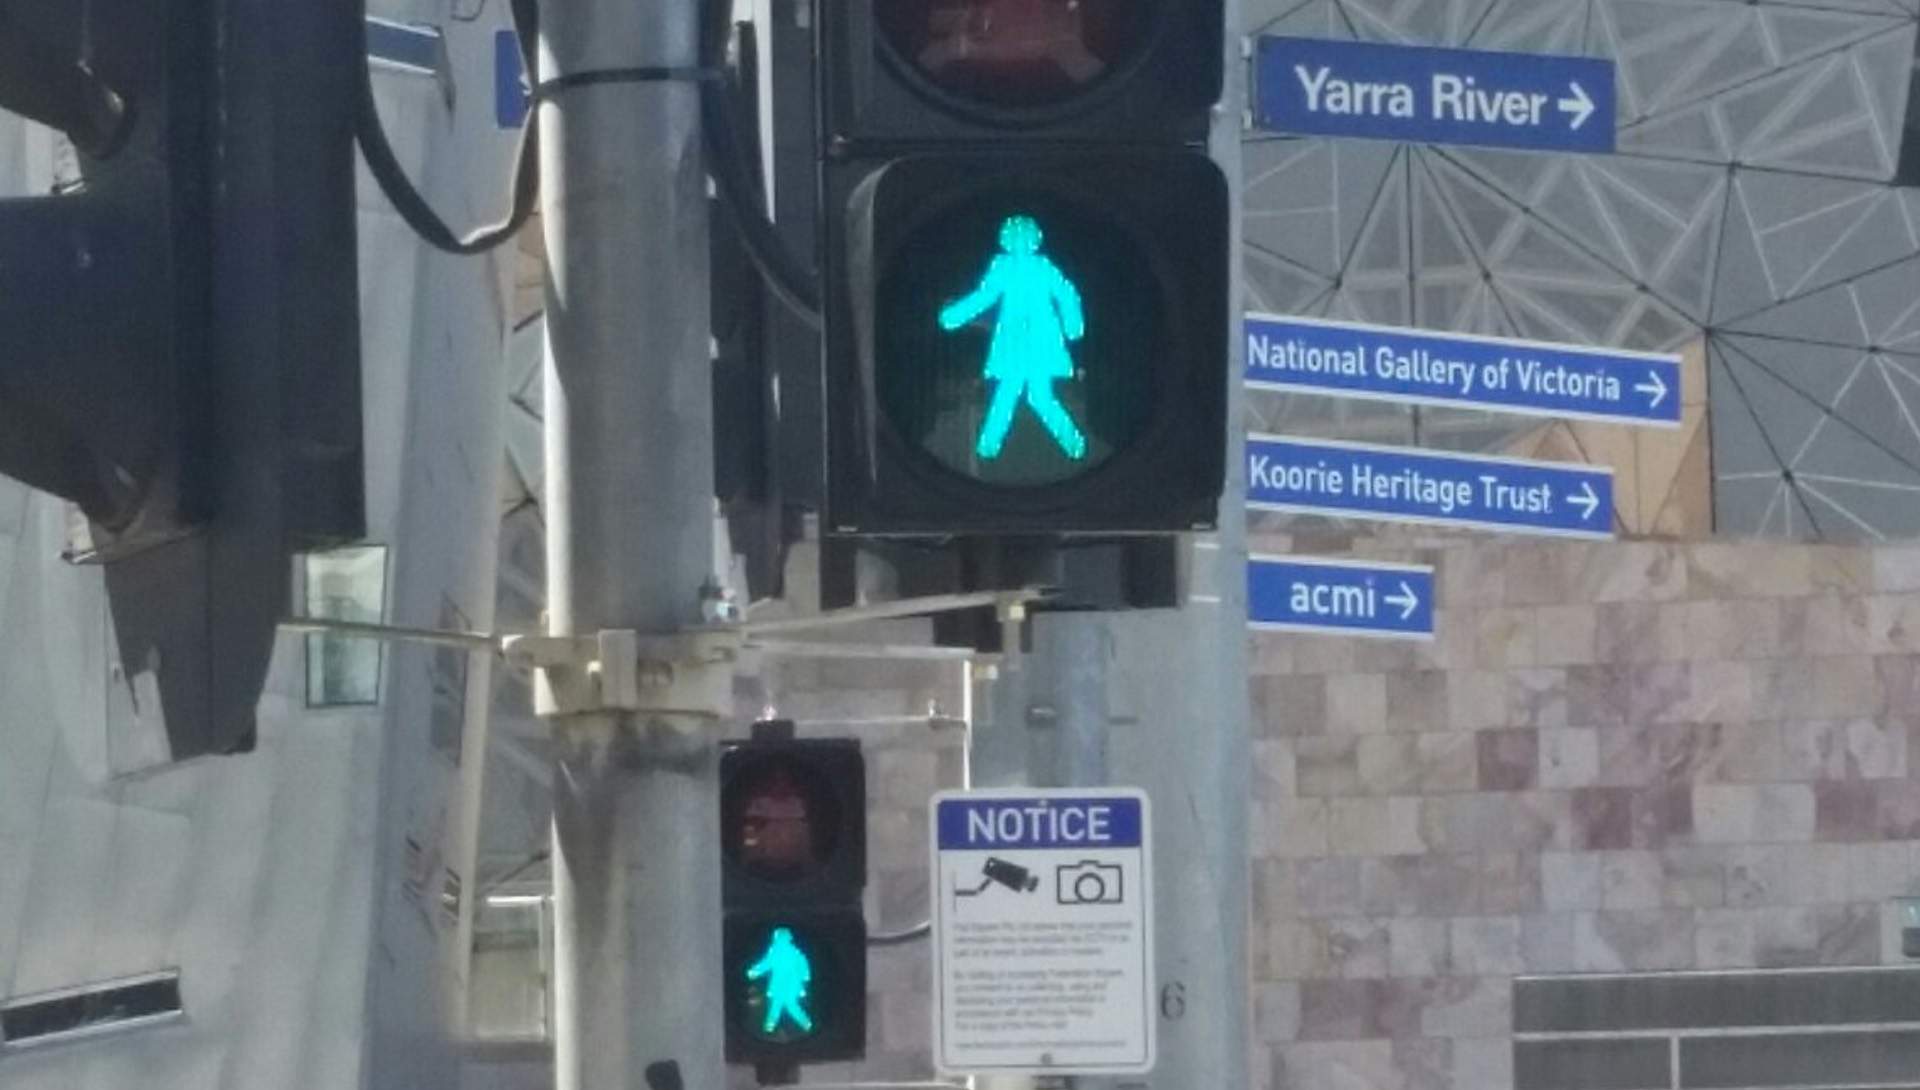 Melbourne Is Getting 'Female' Traffic Lights for International Women's Day